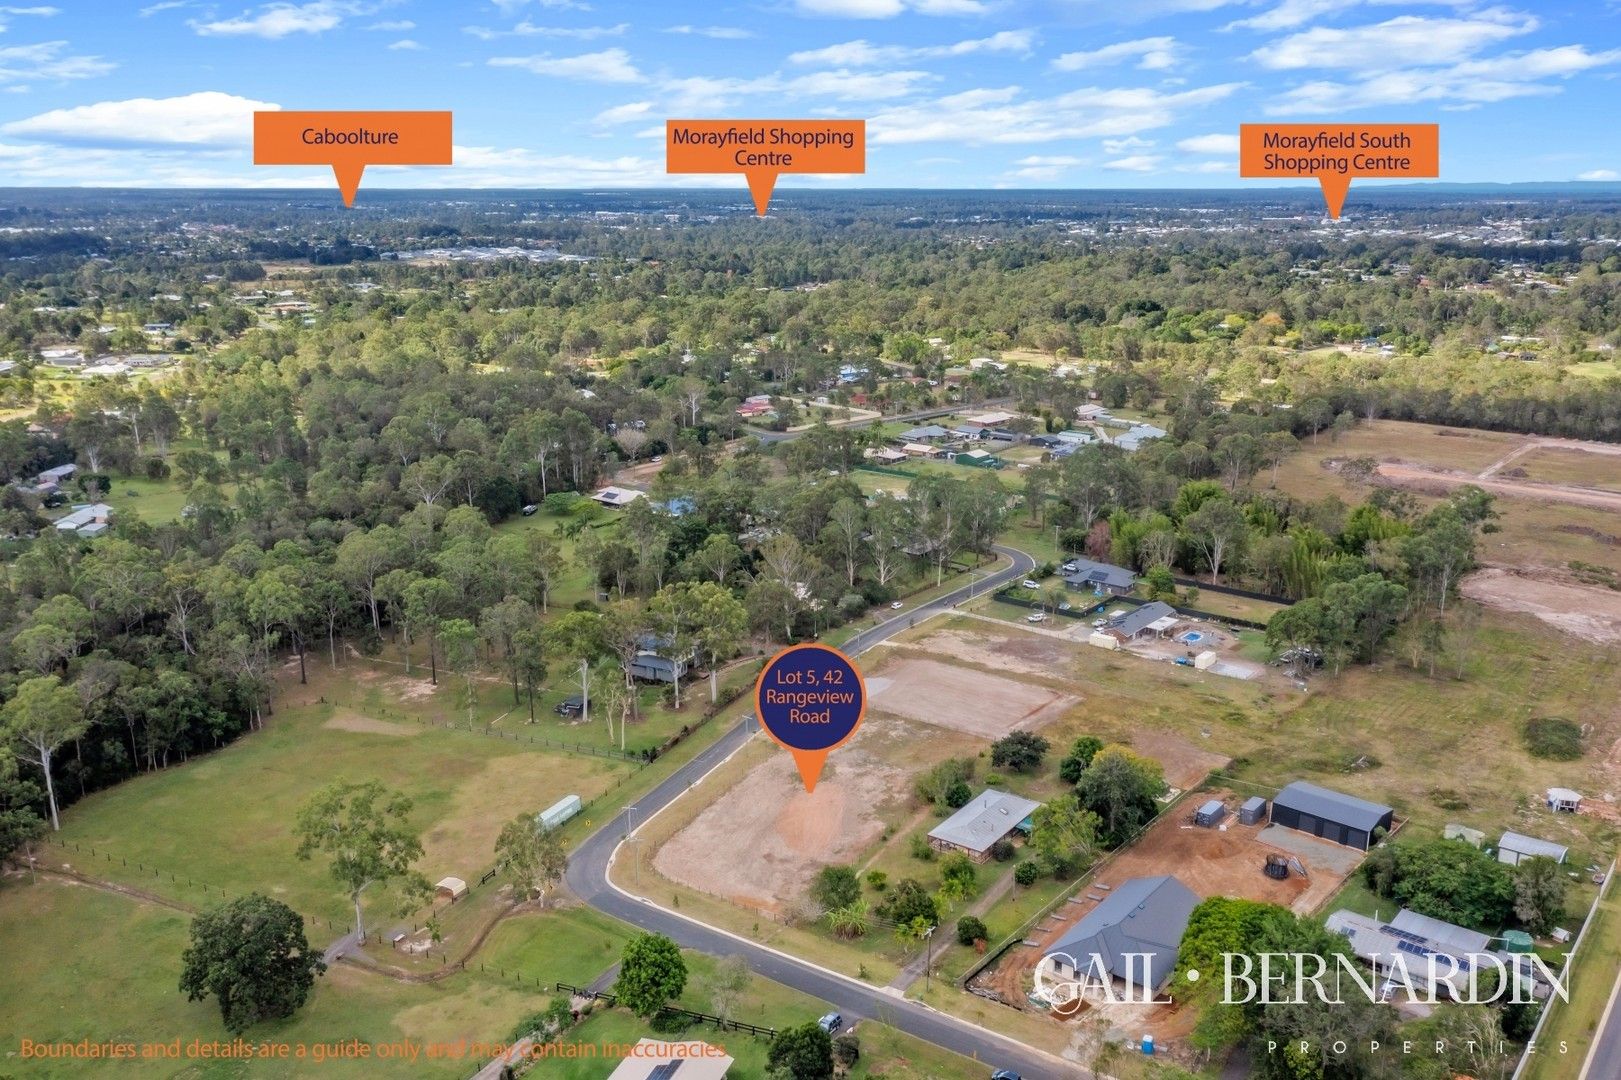 Lot 5 (proposed)/42 Rangeview Road, Morayfield QLD 4506, Image 0